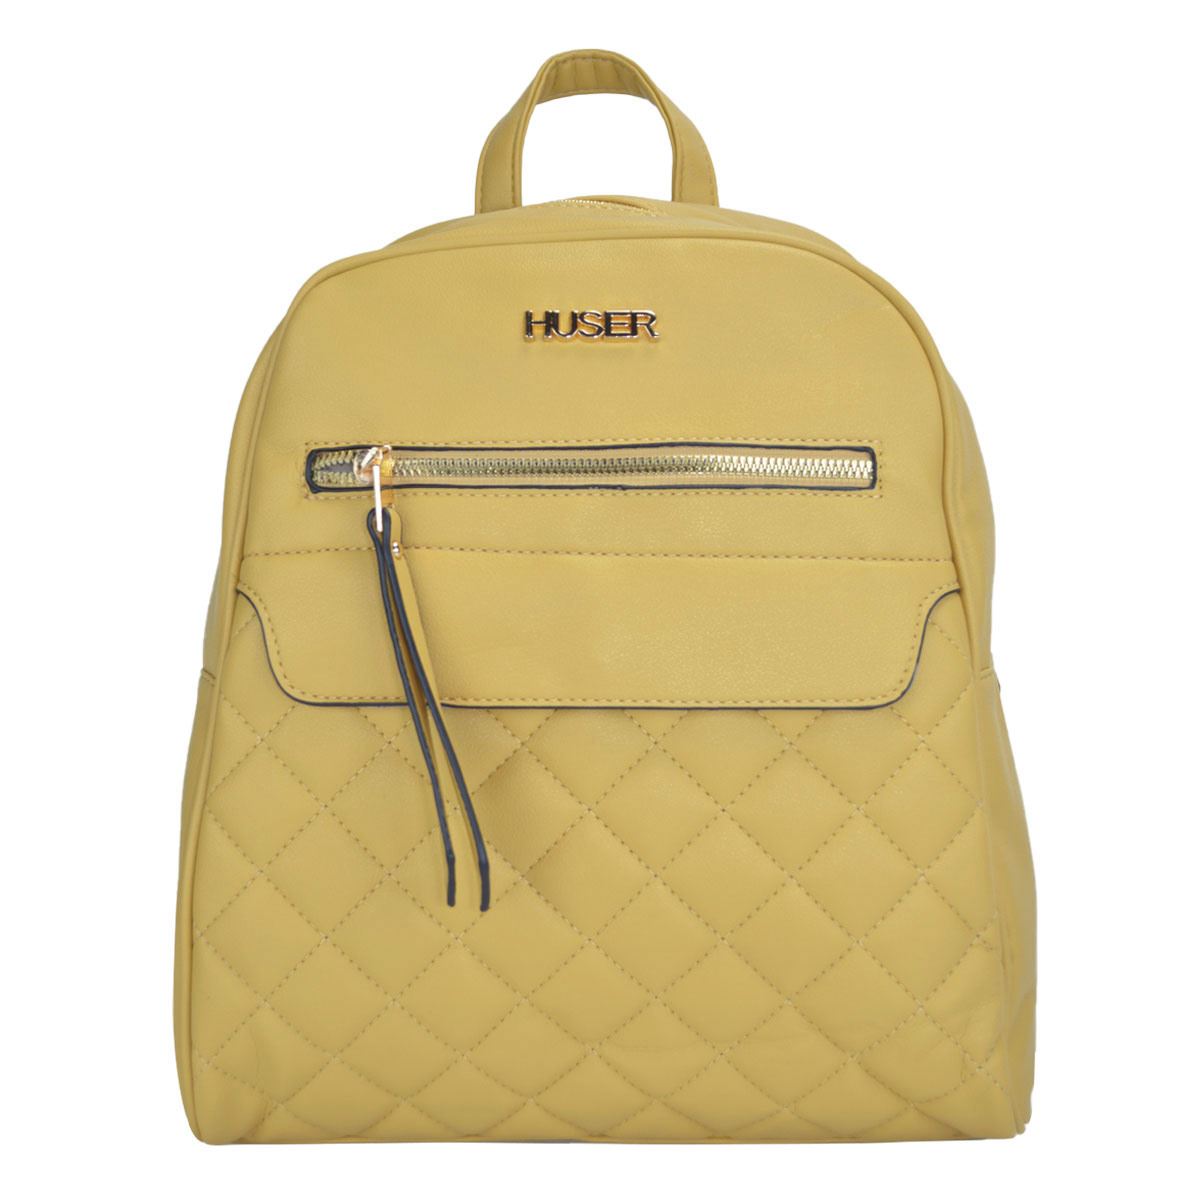 Huser Tipo Backpack color amarillo L11145AAM